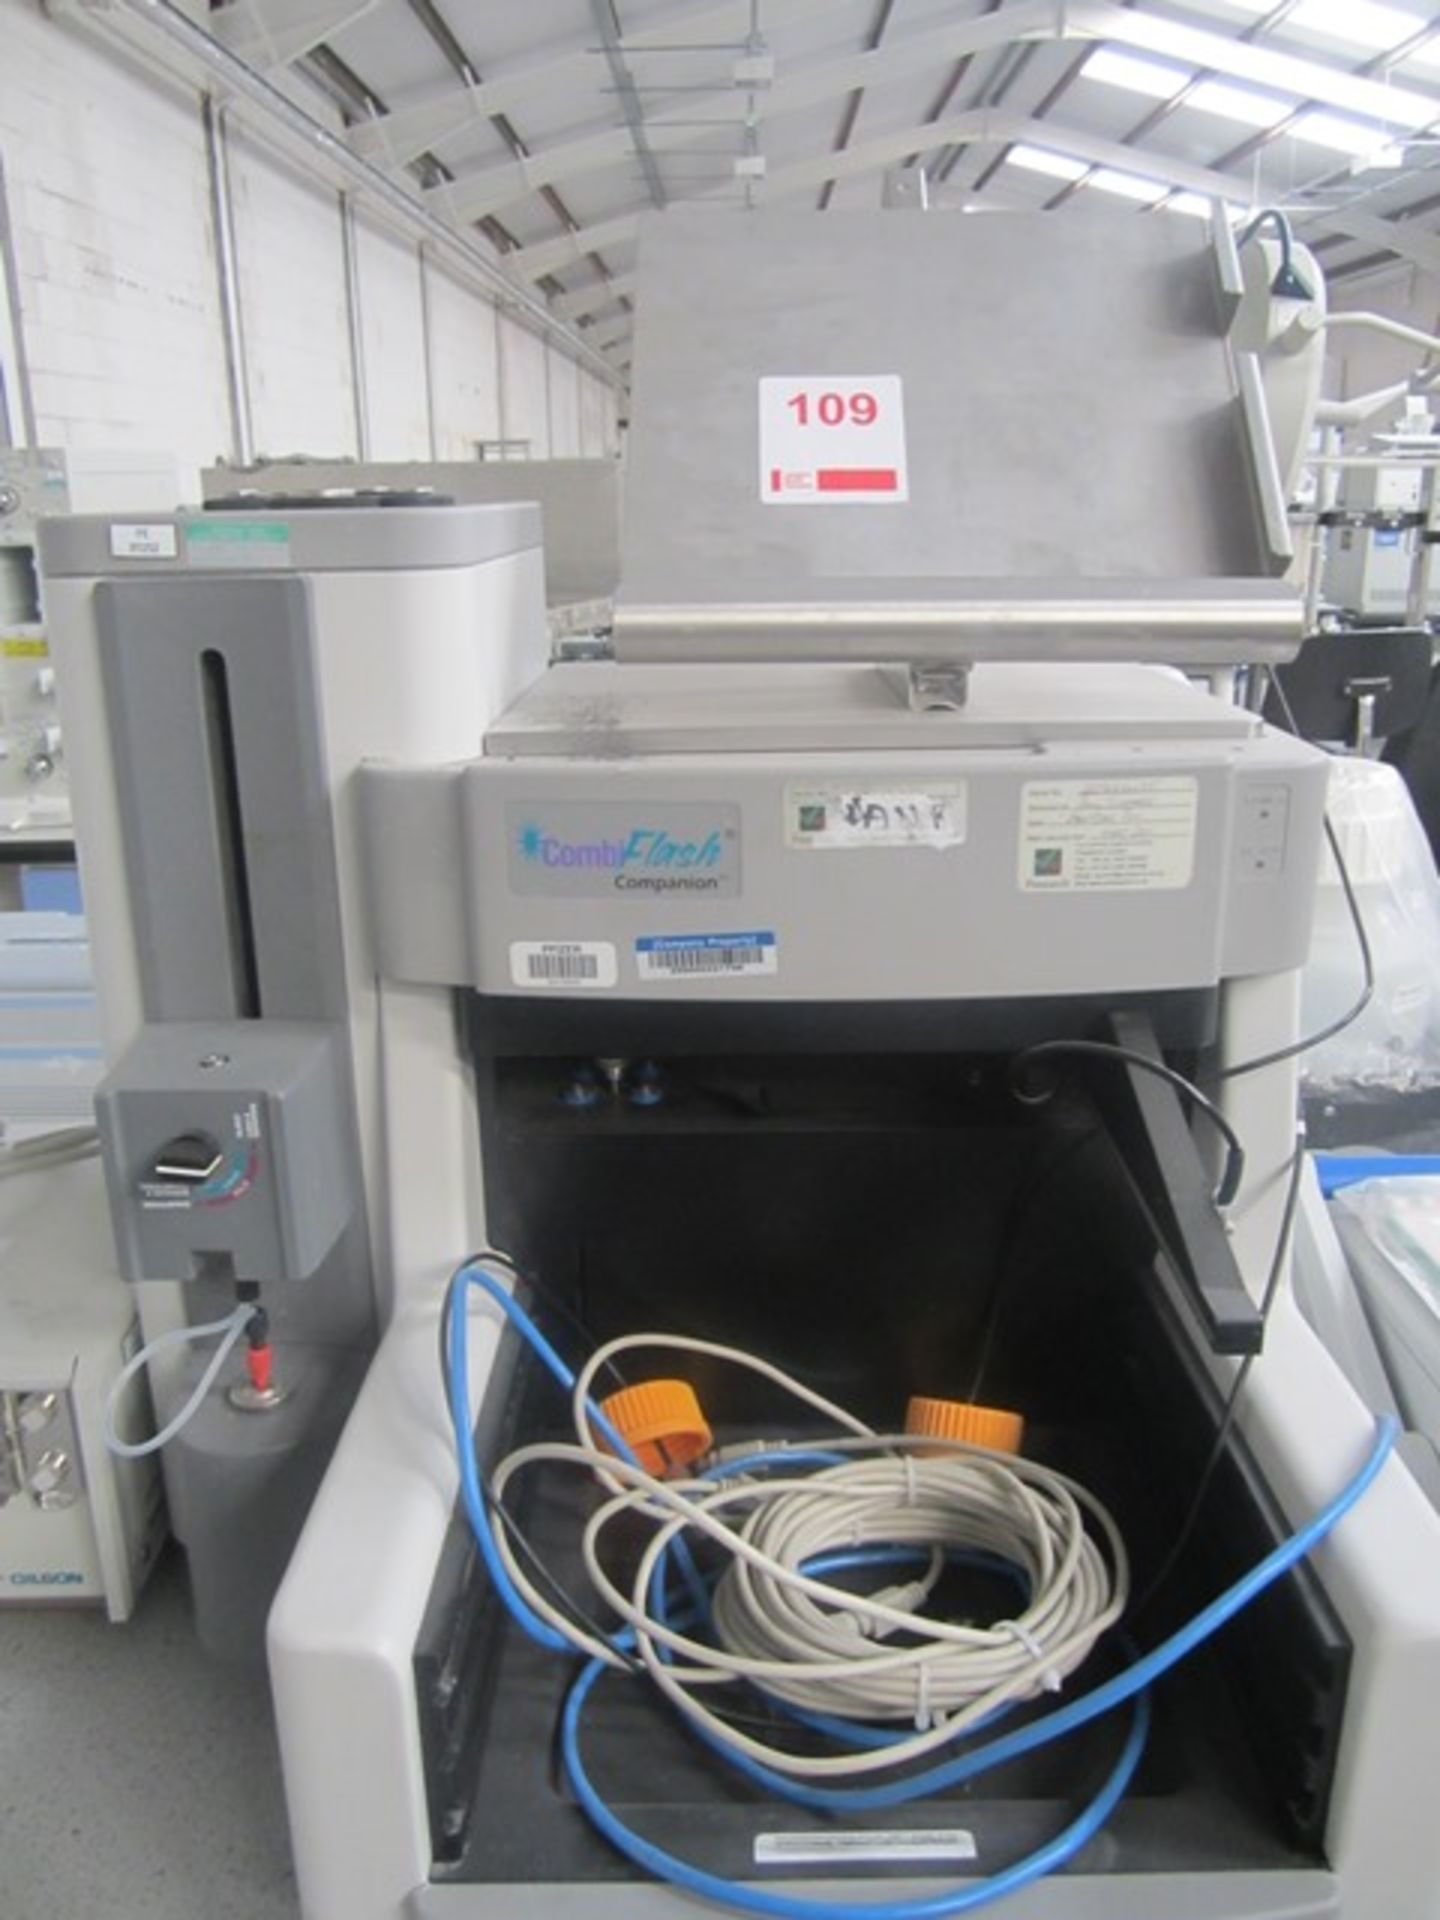 Teledyne Isco Combiflash companion purification system, serial number 204D20125 (height 750mm x